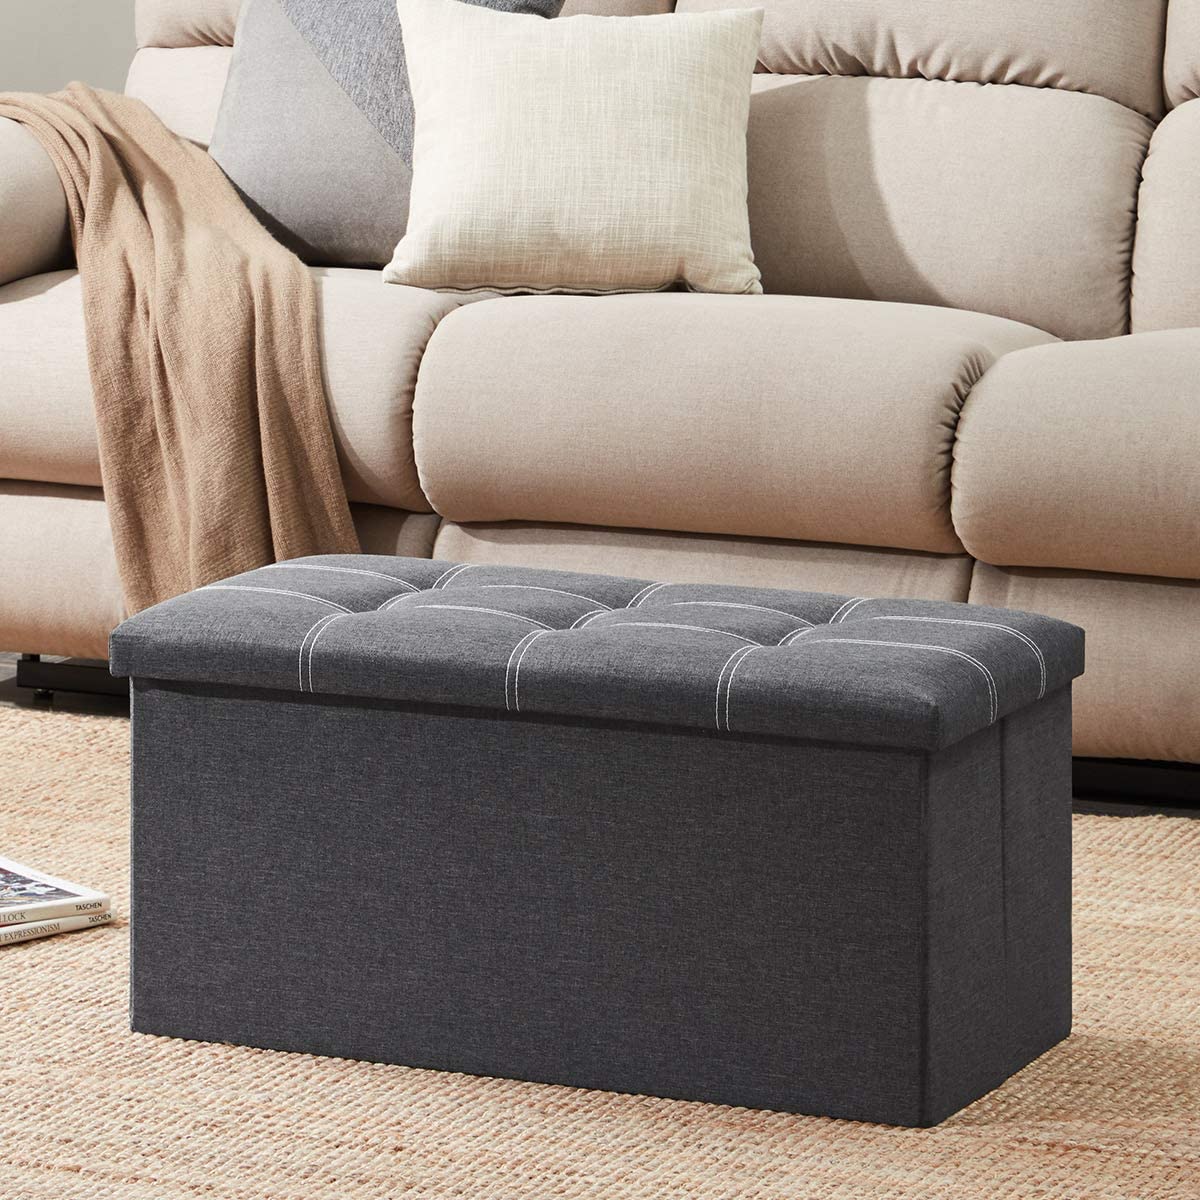 Ottomans : 30 inches Storage Ottoman Bench, Foldable Footrest